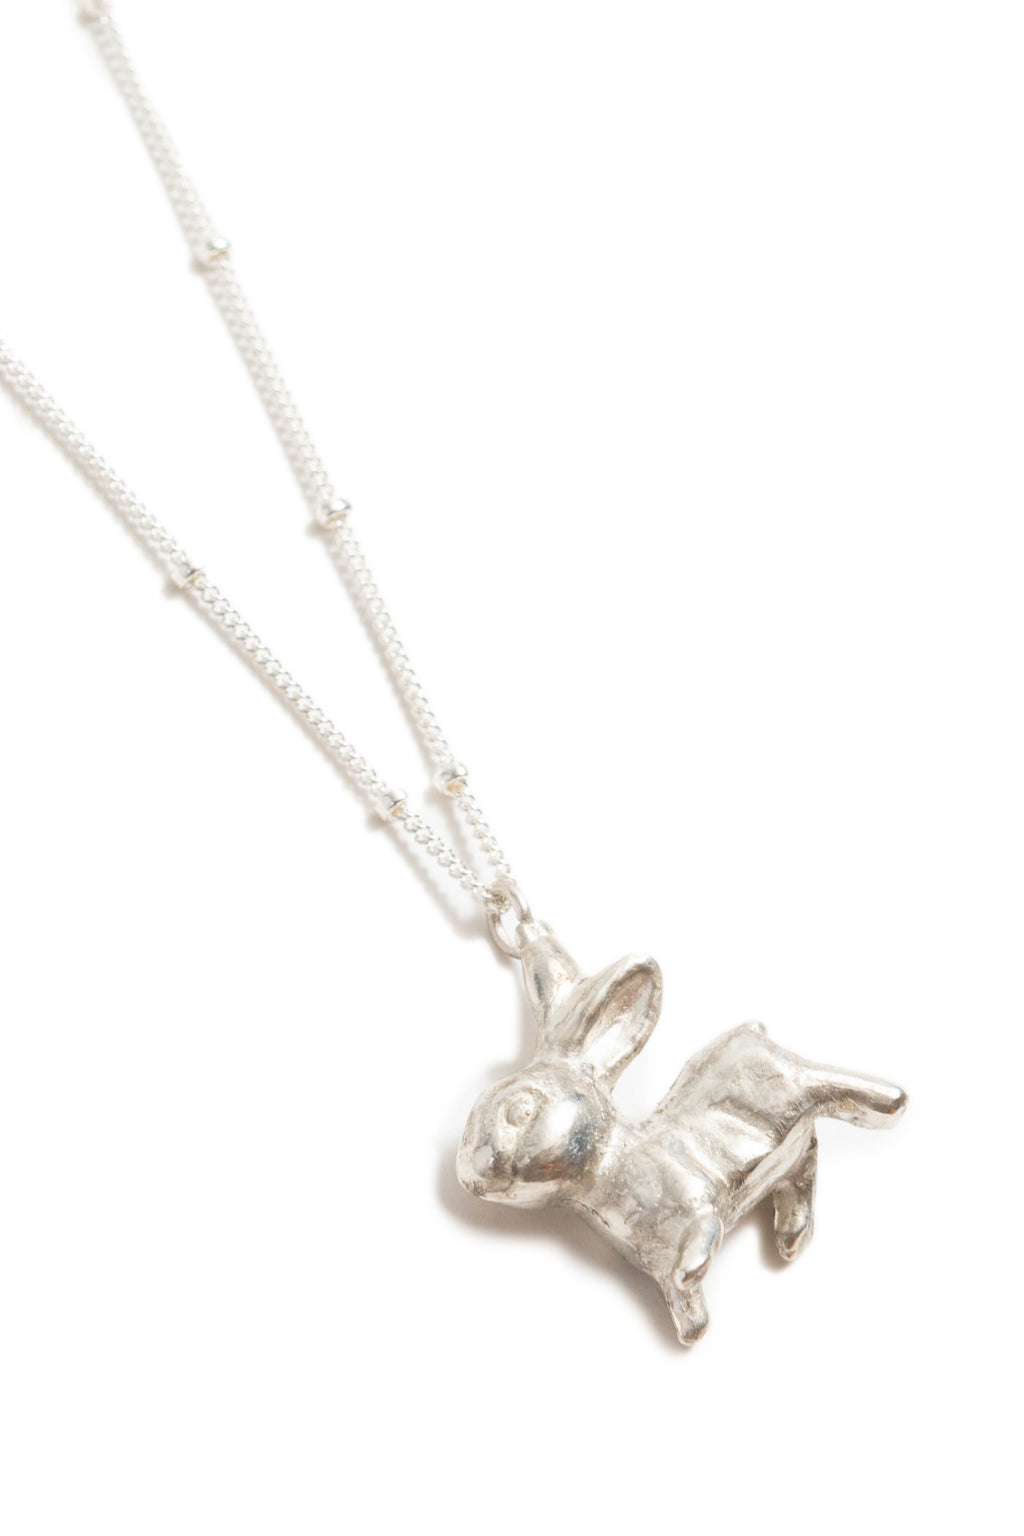 CAT LUCK "Some Bunny" Sterling Silver Necklace